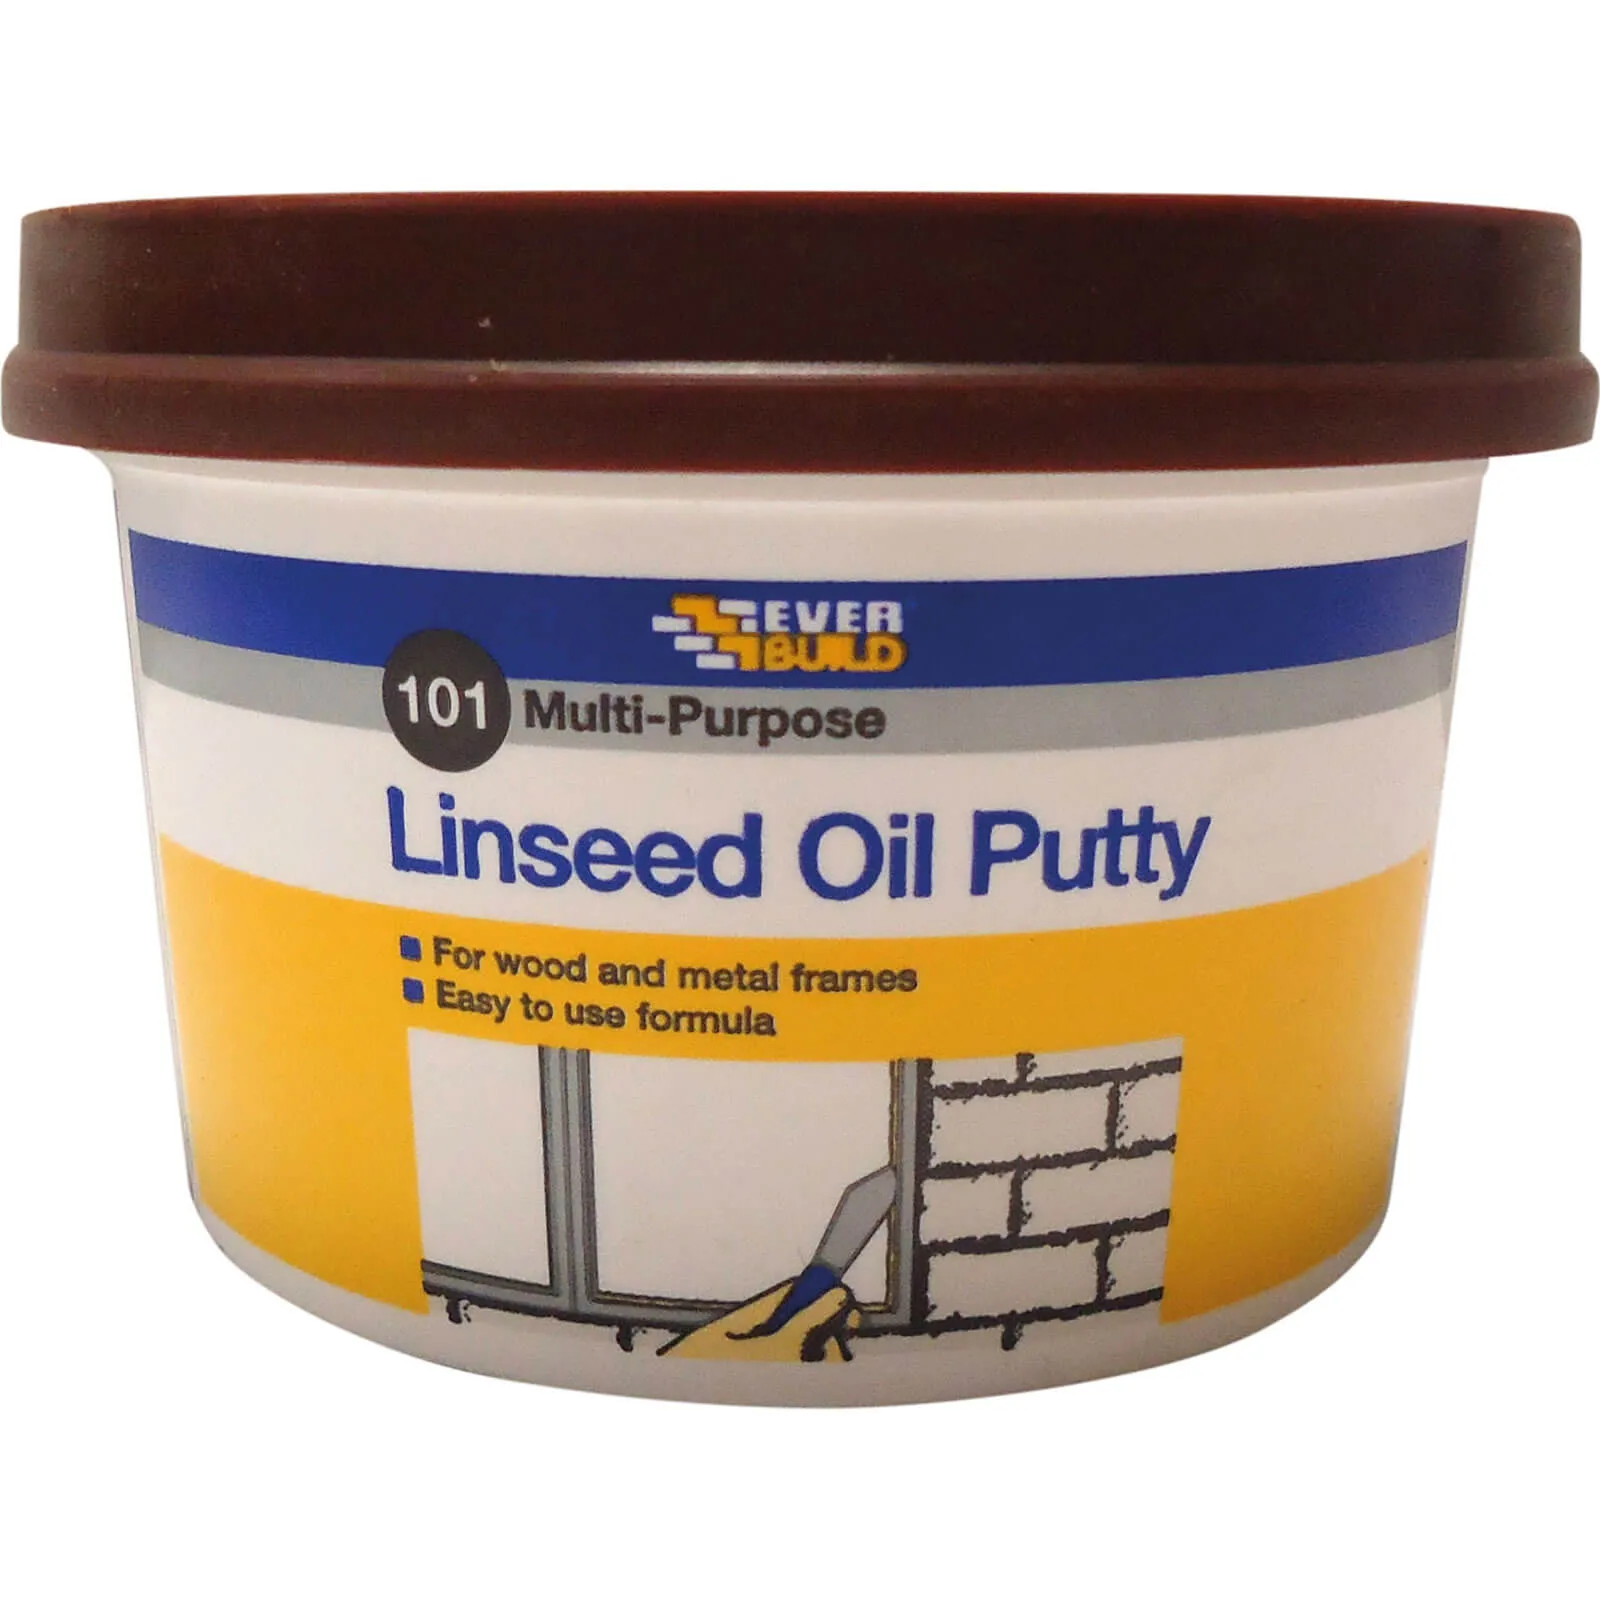 Everbuild Multi Purpose Linseed Oil Putty - Brown, 500g